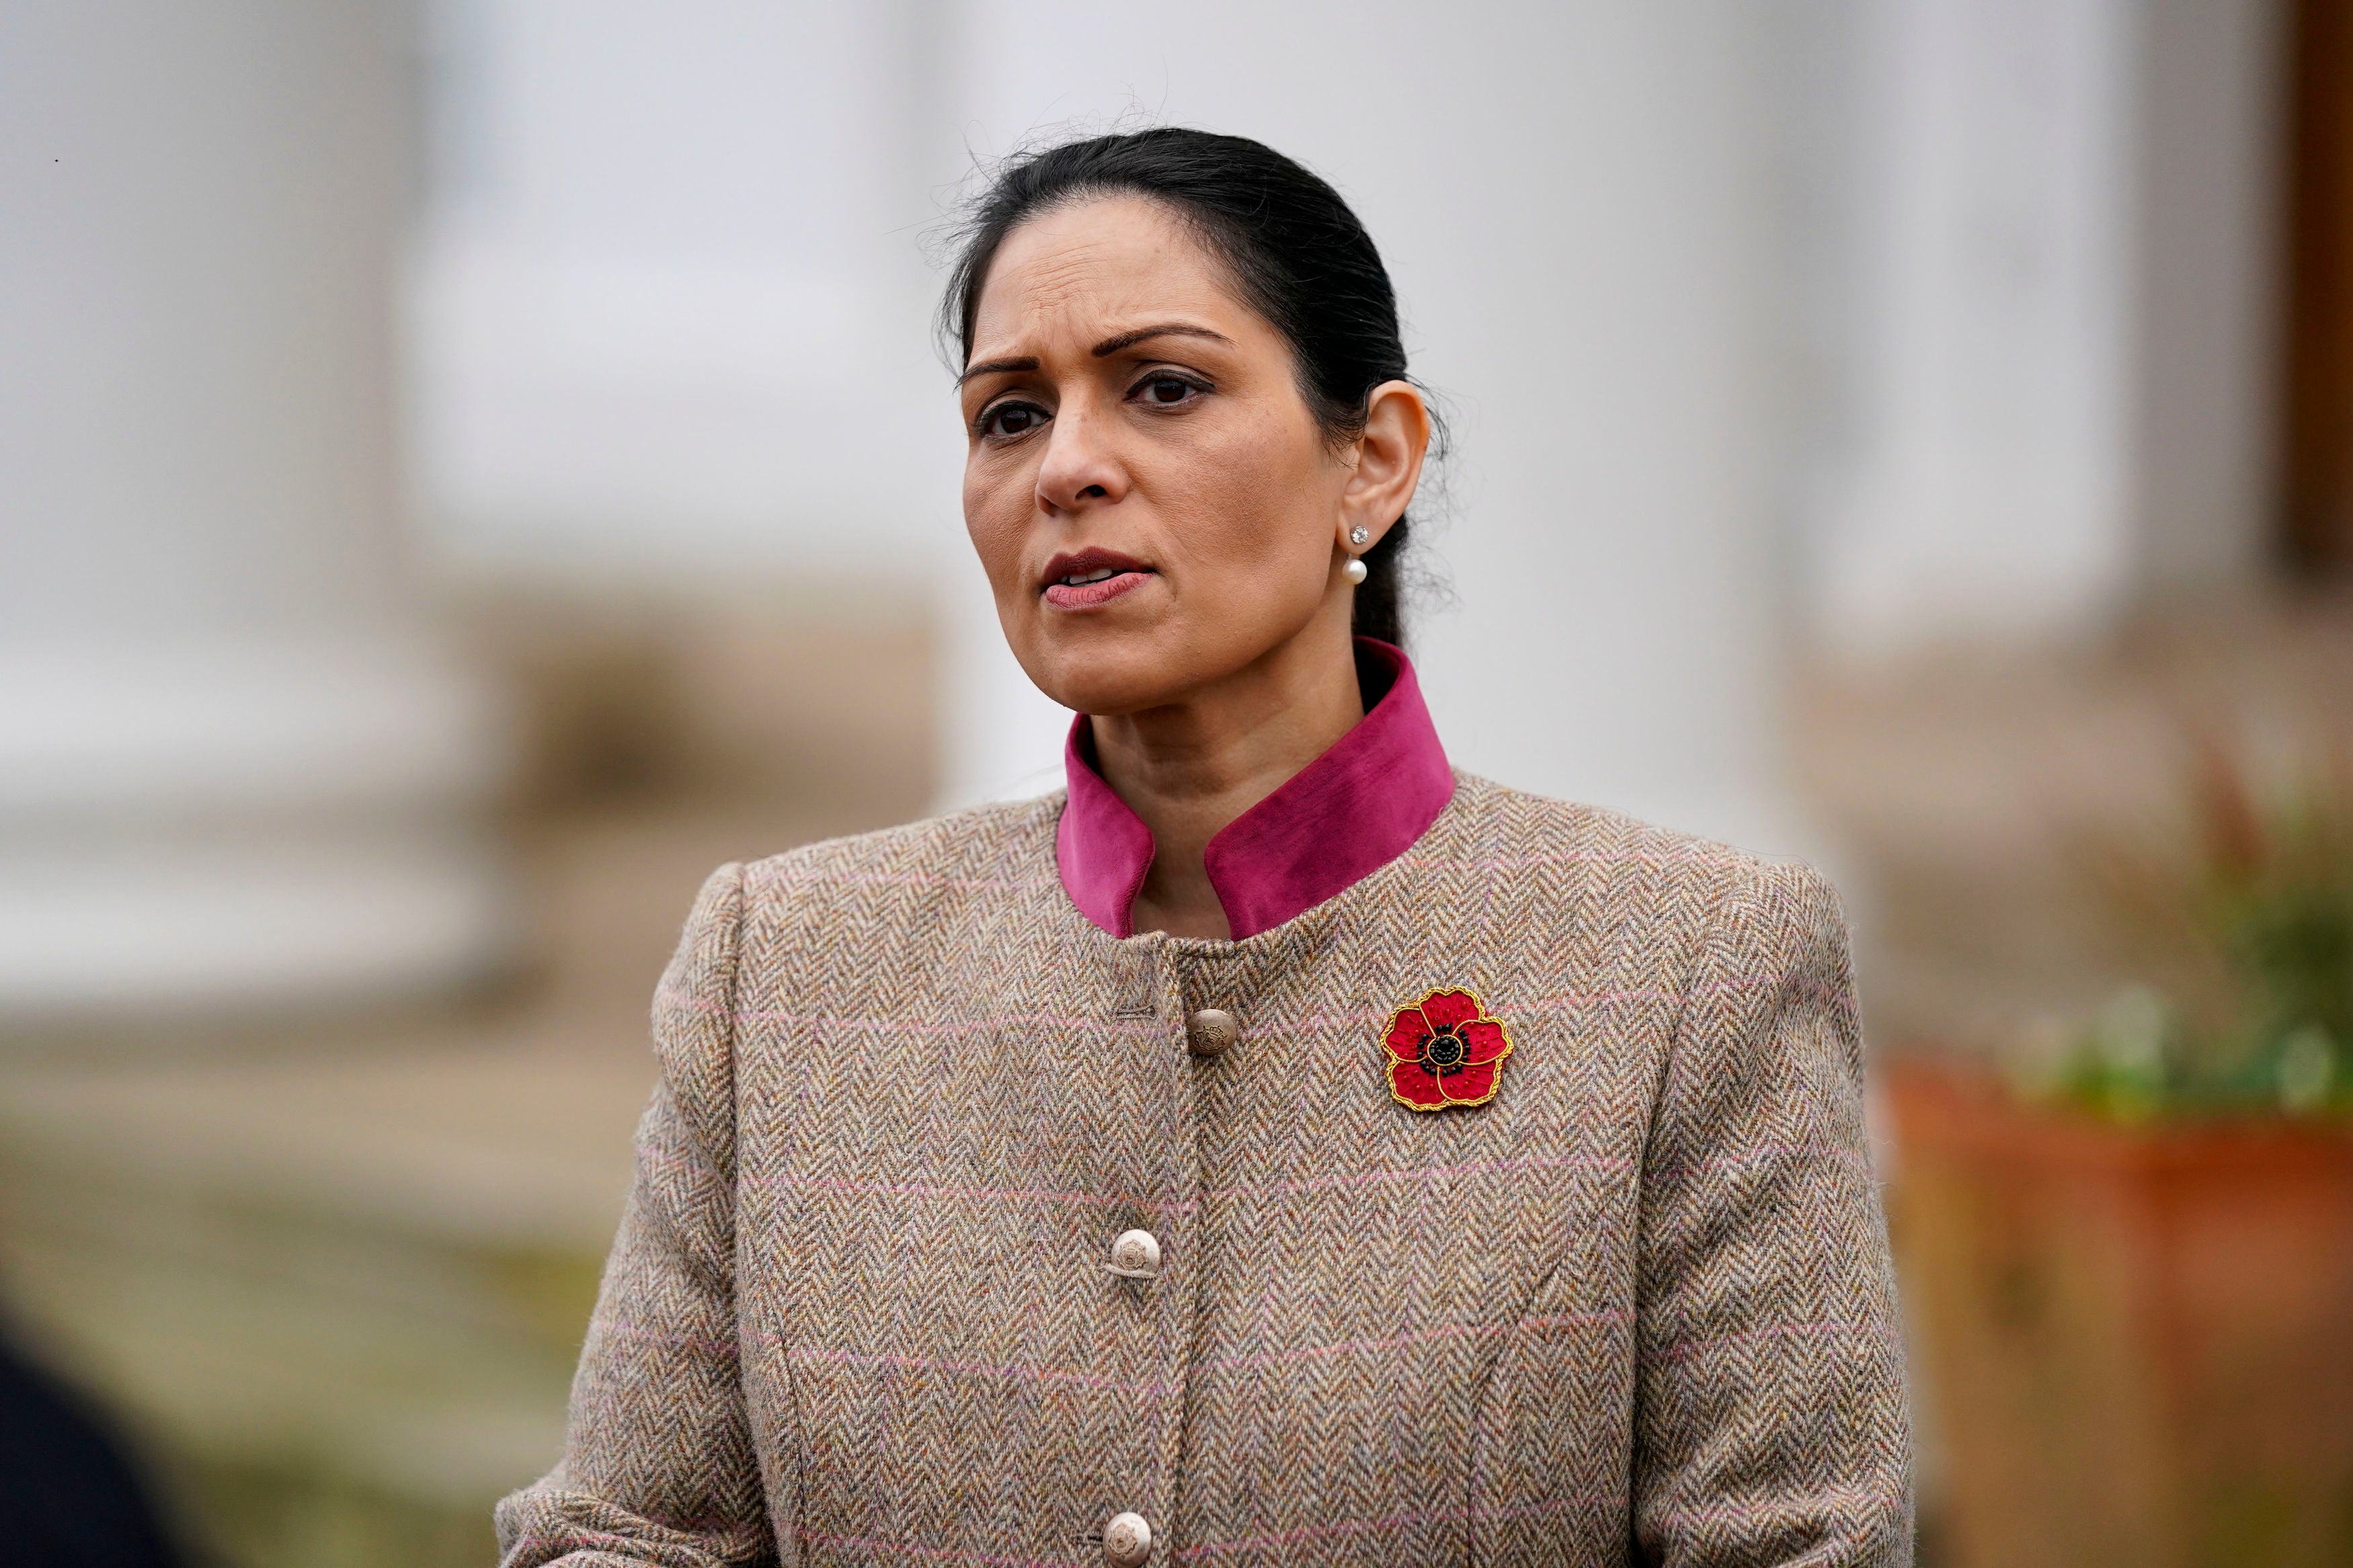 The home secretary Priti Patel criticised the ‘dysfunctional’ asylum system after the Liverpool bombing